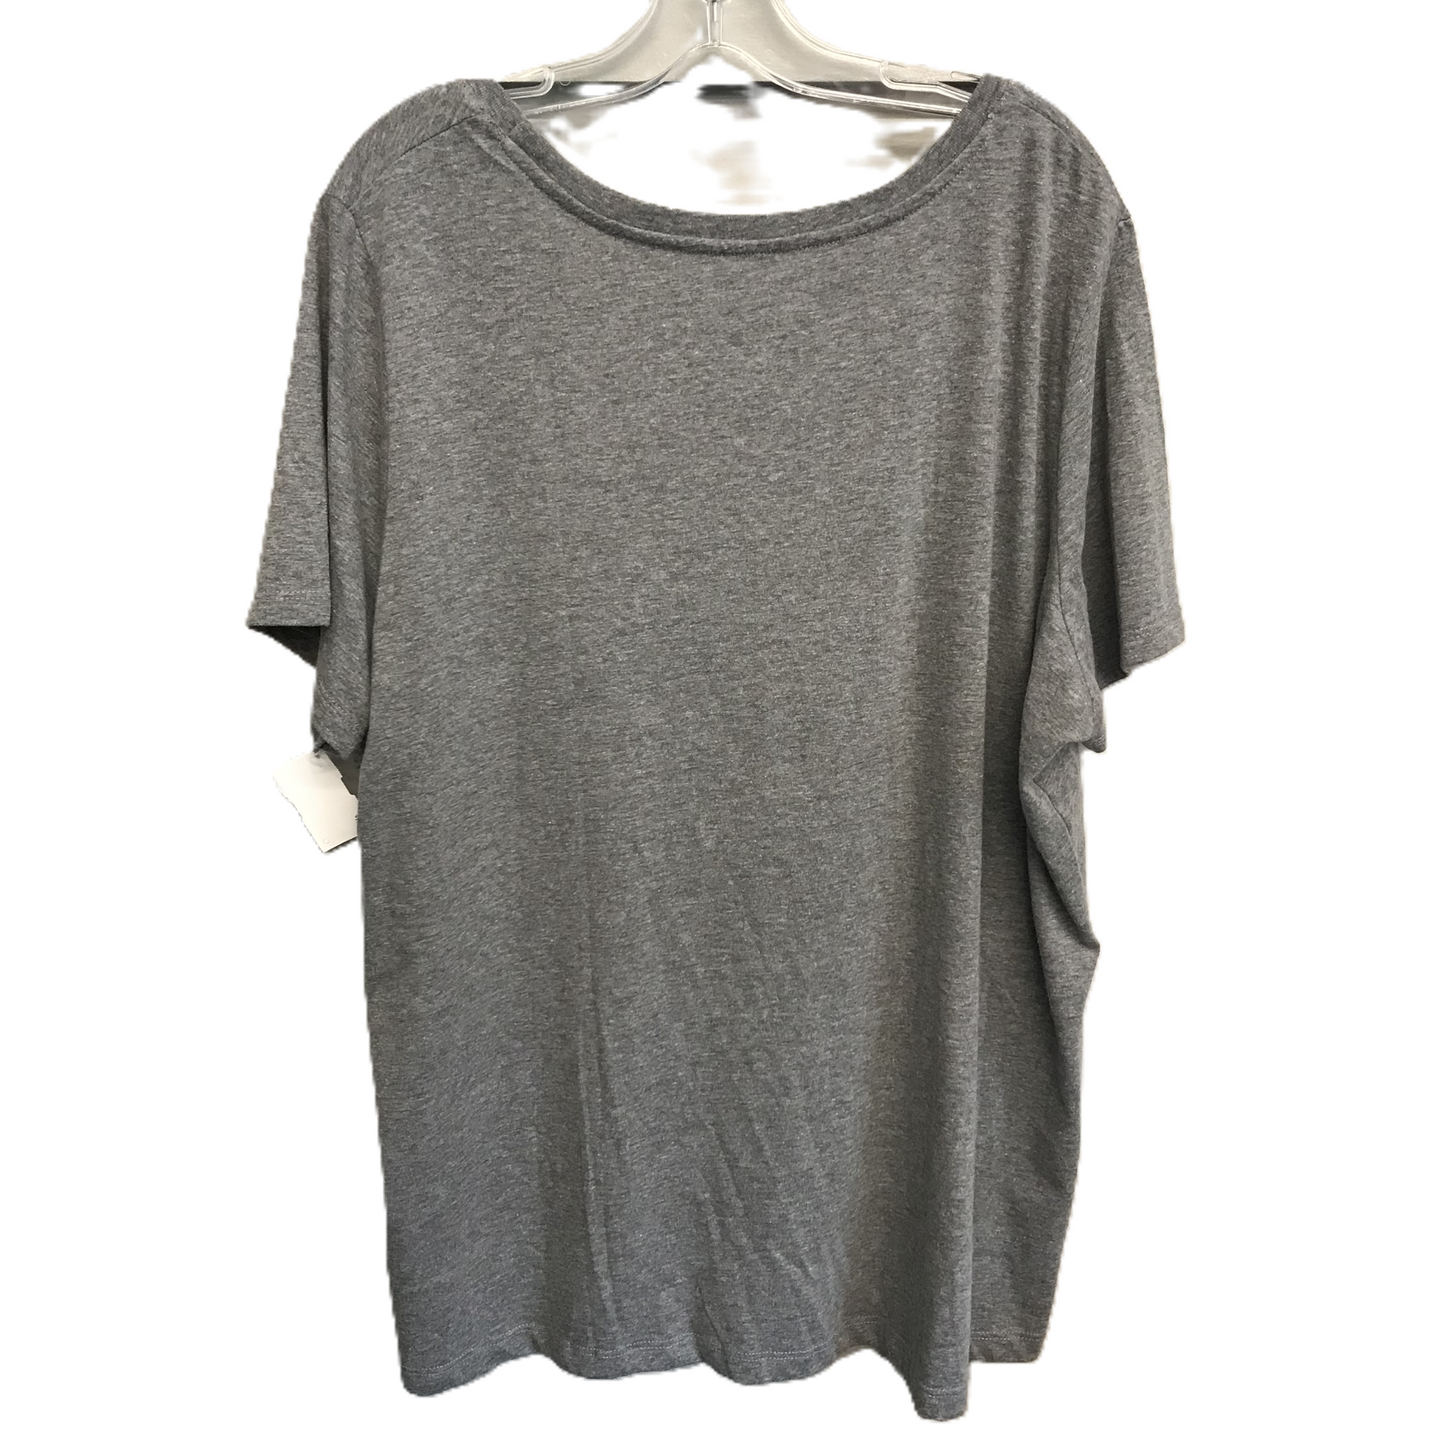 Grey Top Short Sleeve Basic By Woman Within, Size: 1x